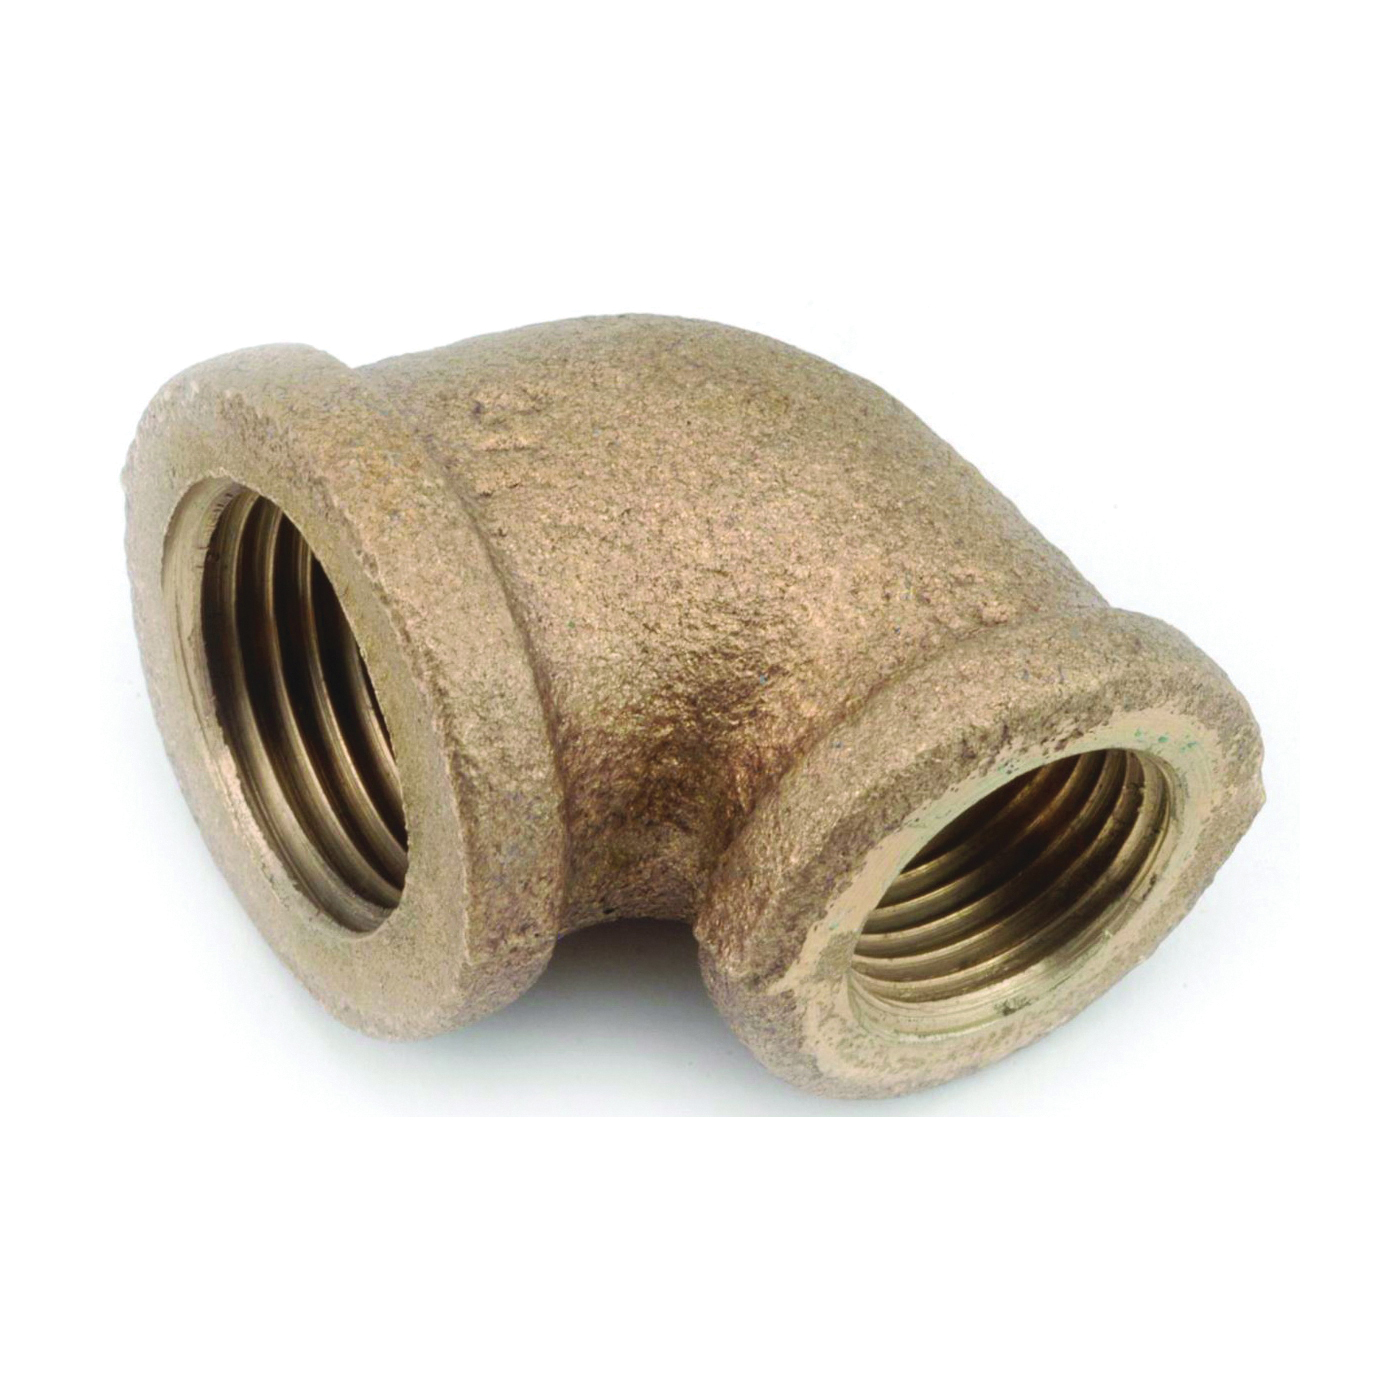 738105-0602 Reducing Pipe Elbow, 3/8 x 1/8 in, FIP, 90 deg Angle, Brass, 200 psi Pressure